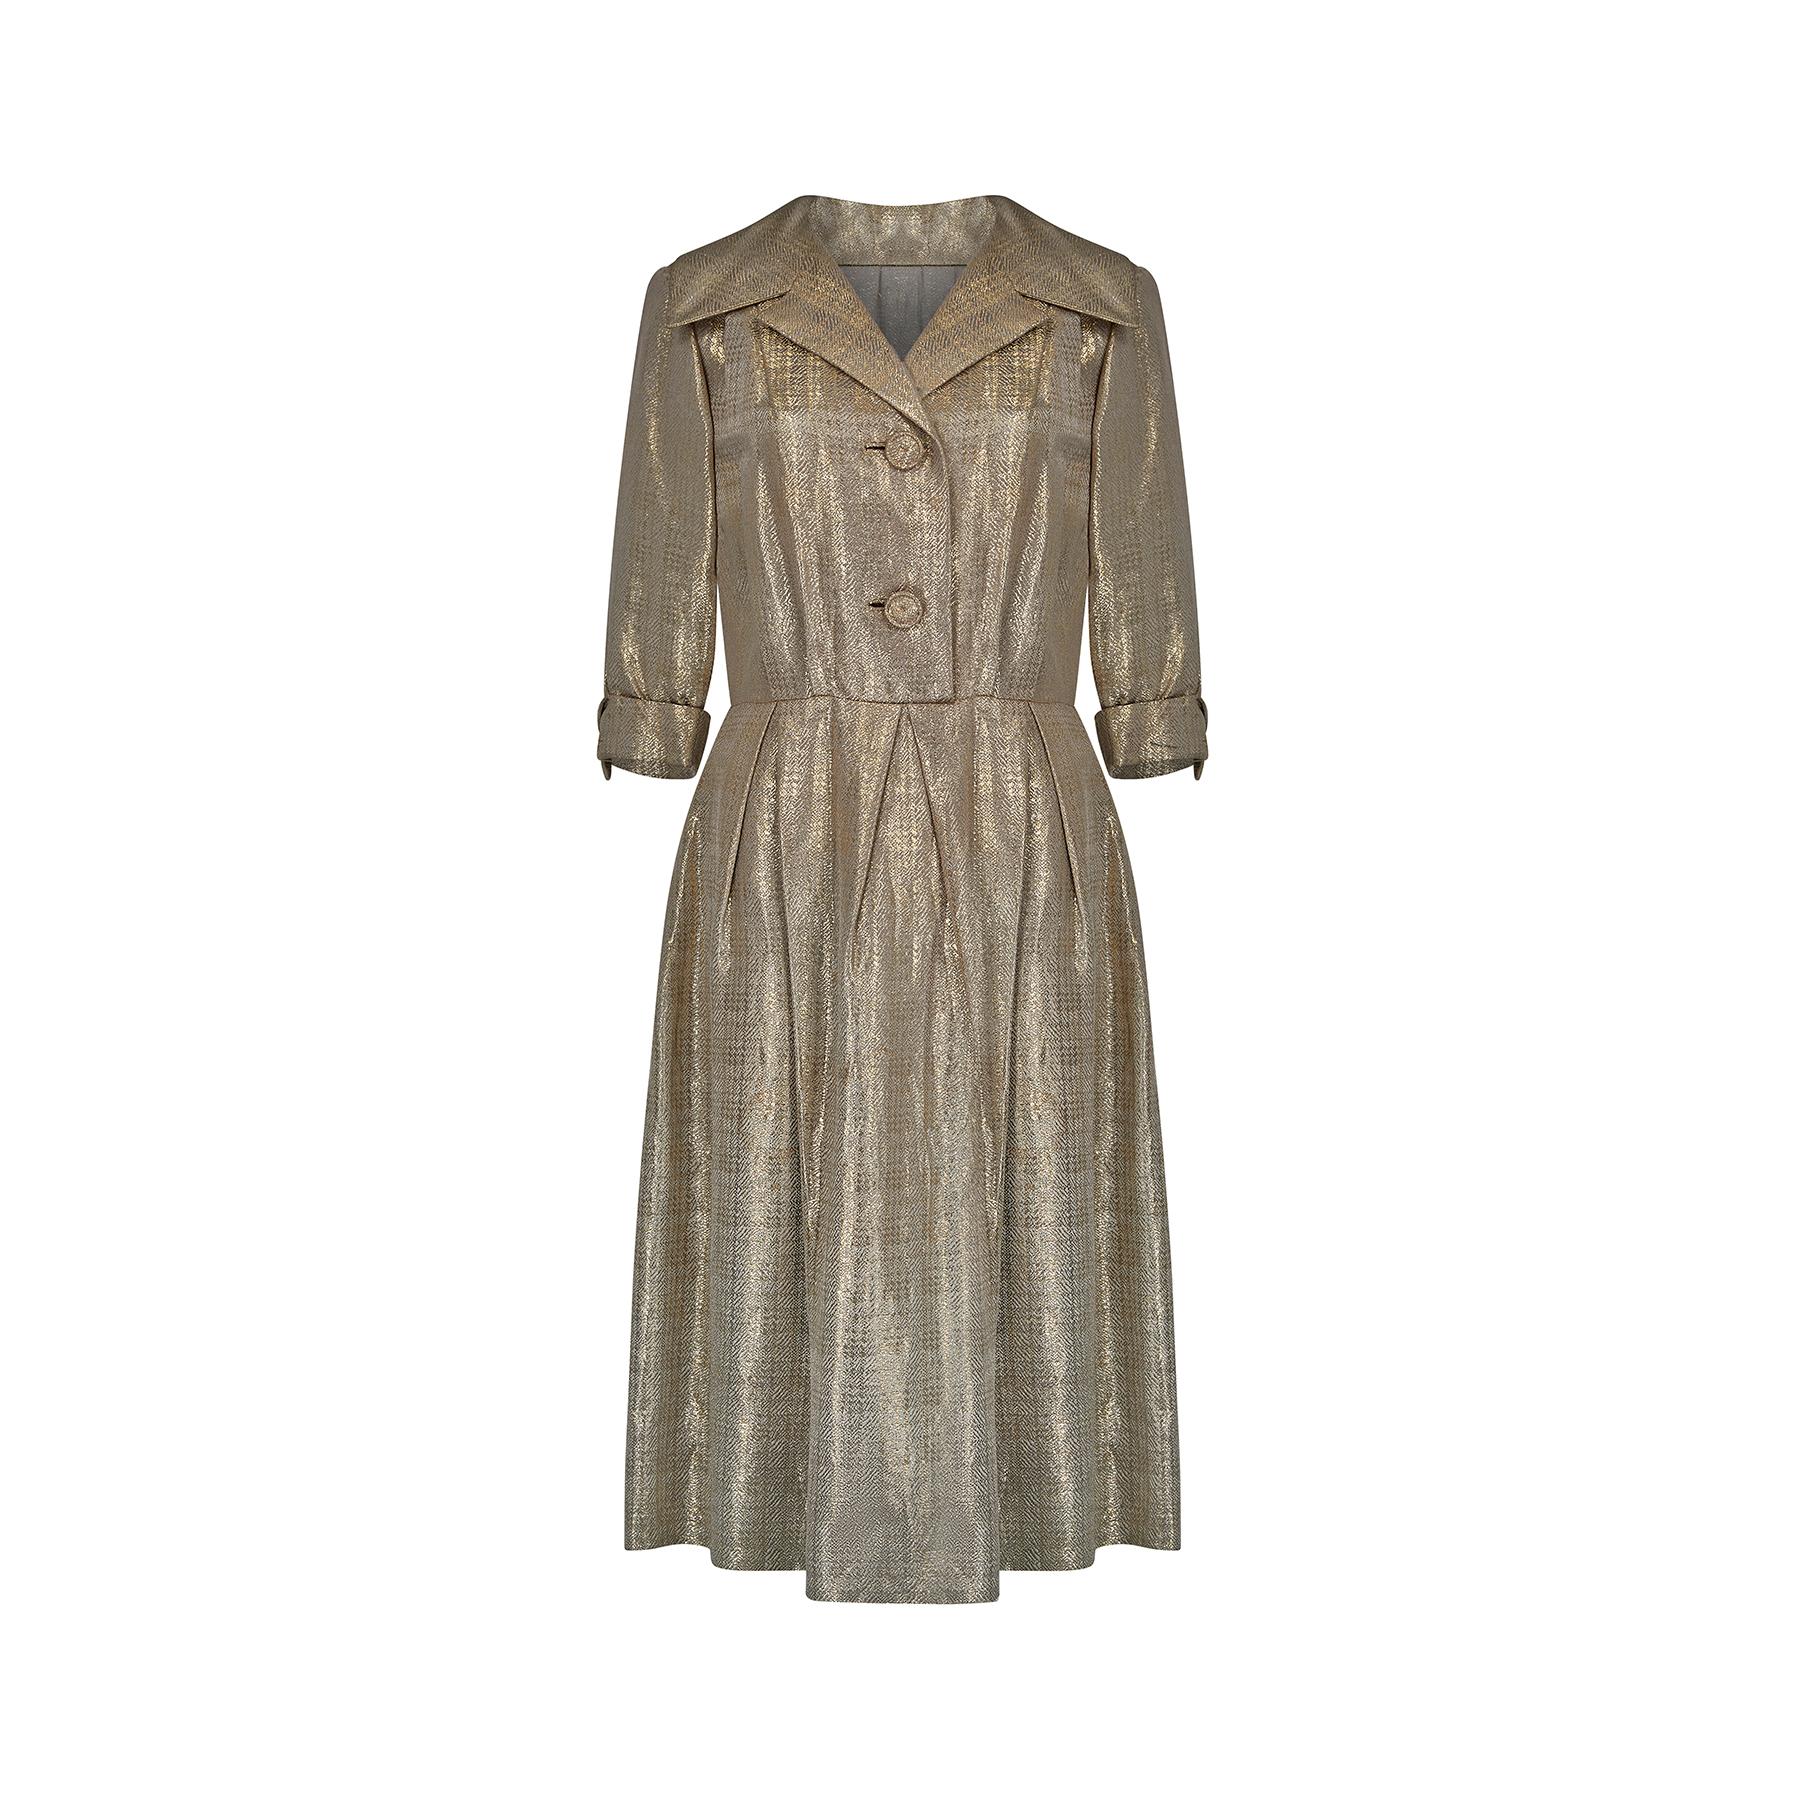 Original 1950s or early 1960s lame dress in a classic shirtwaister style with two large front fastening fabric buttons, a smart double lapel collar and a three-quarter length sleeve with turned up cuff.  The skirt has a stunning arrangement of darts